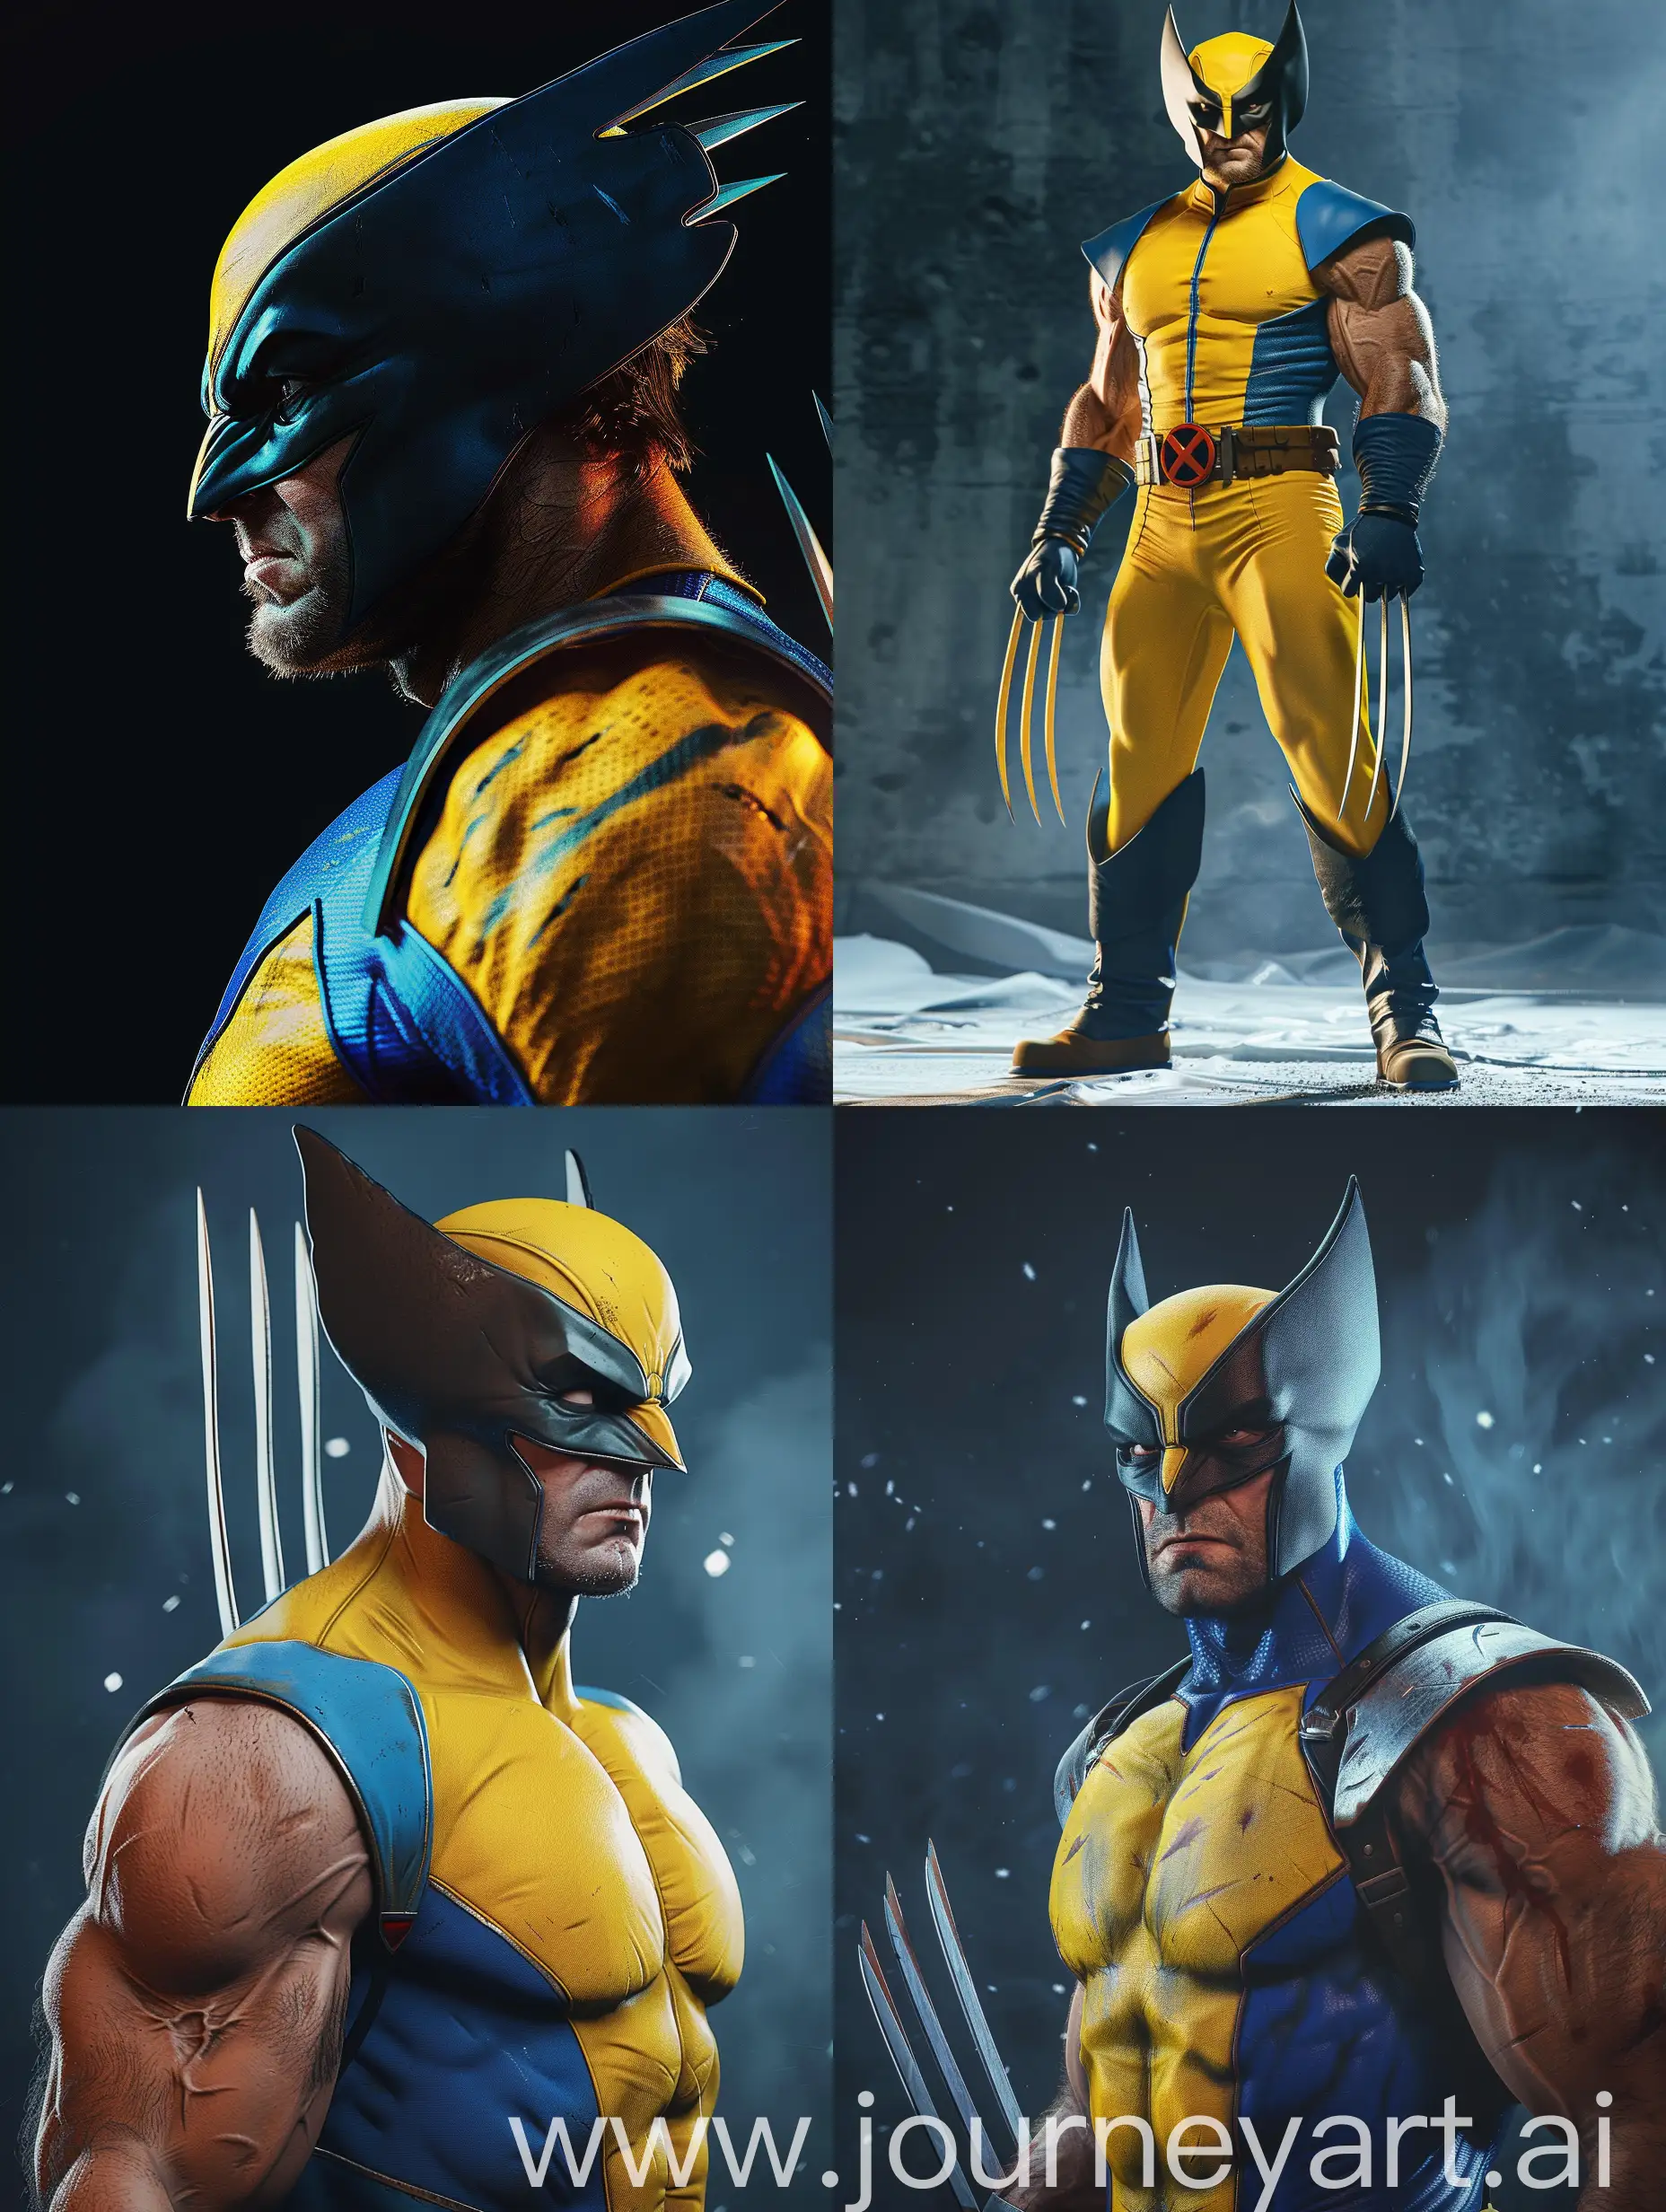 Marvel Wolverine in classic yellow and blue suit played by Hugh jackman body forward looking to the side ((8K)) (ultra detailed)
